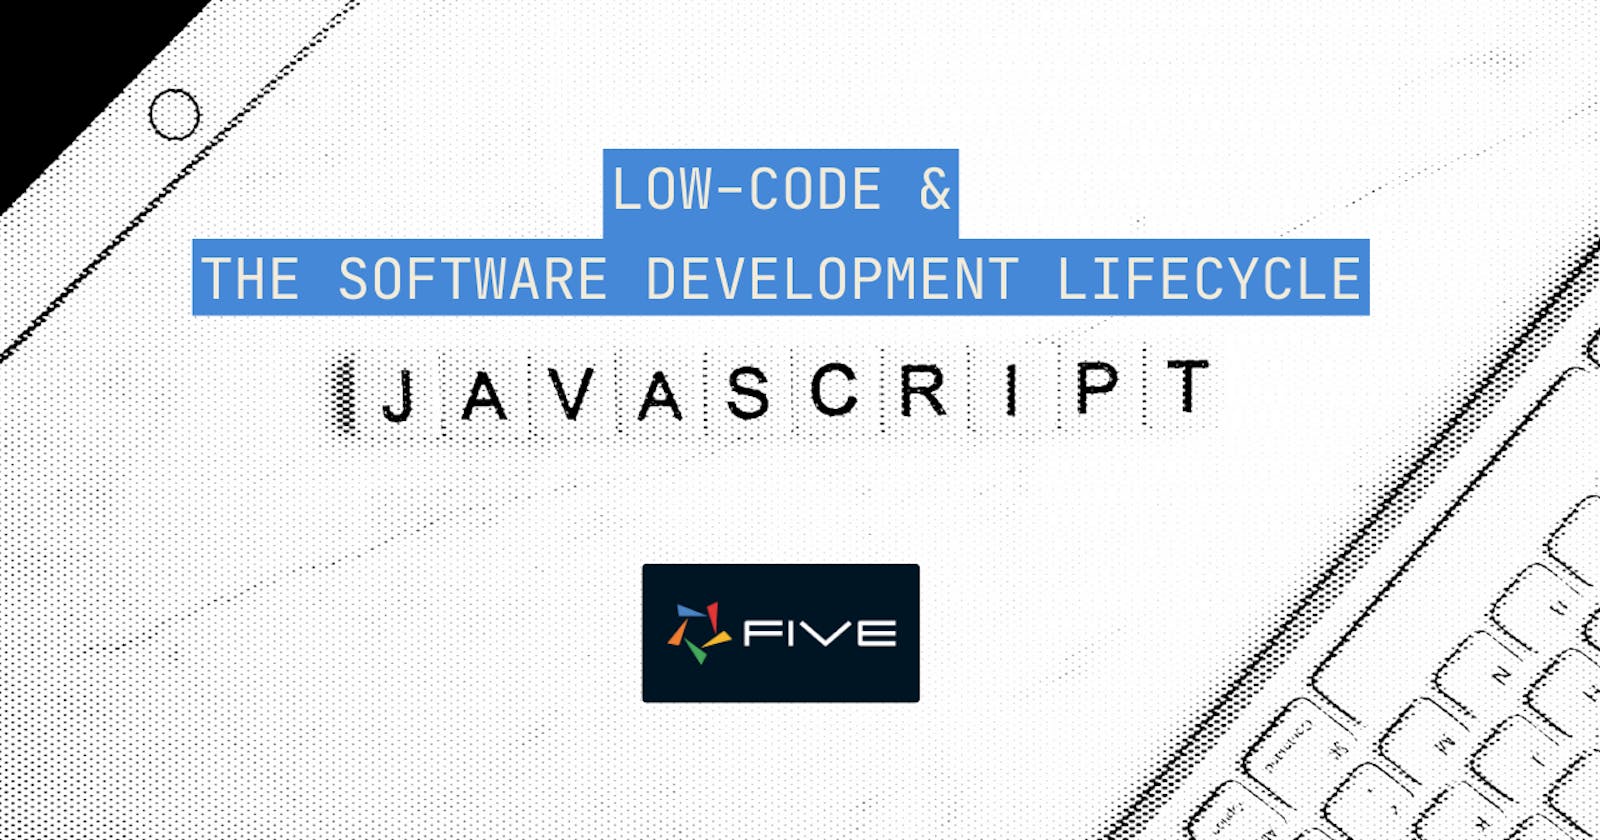 Low-Code & The Software Development Lifecycle